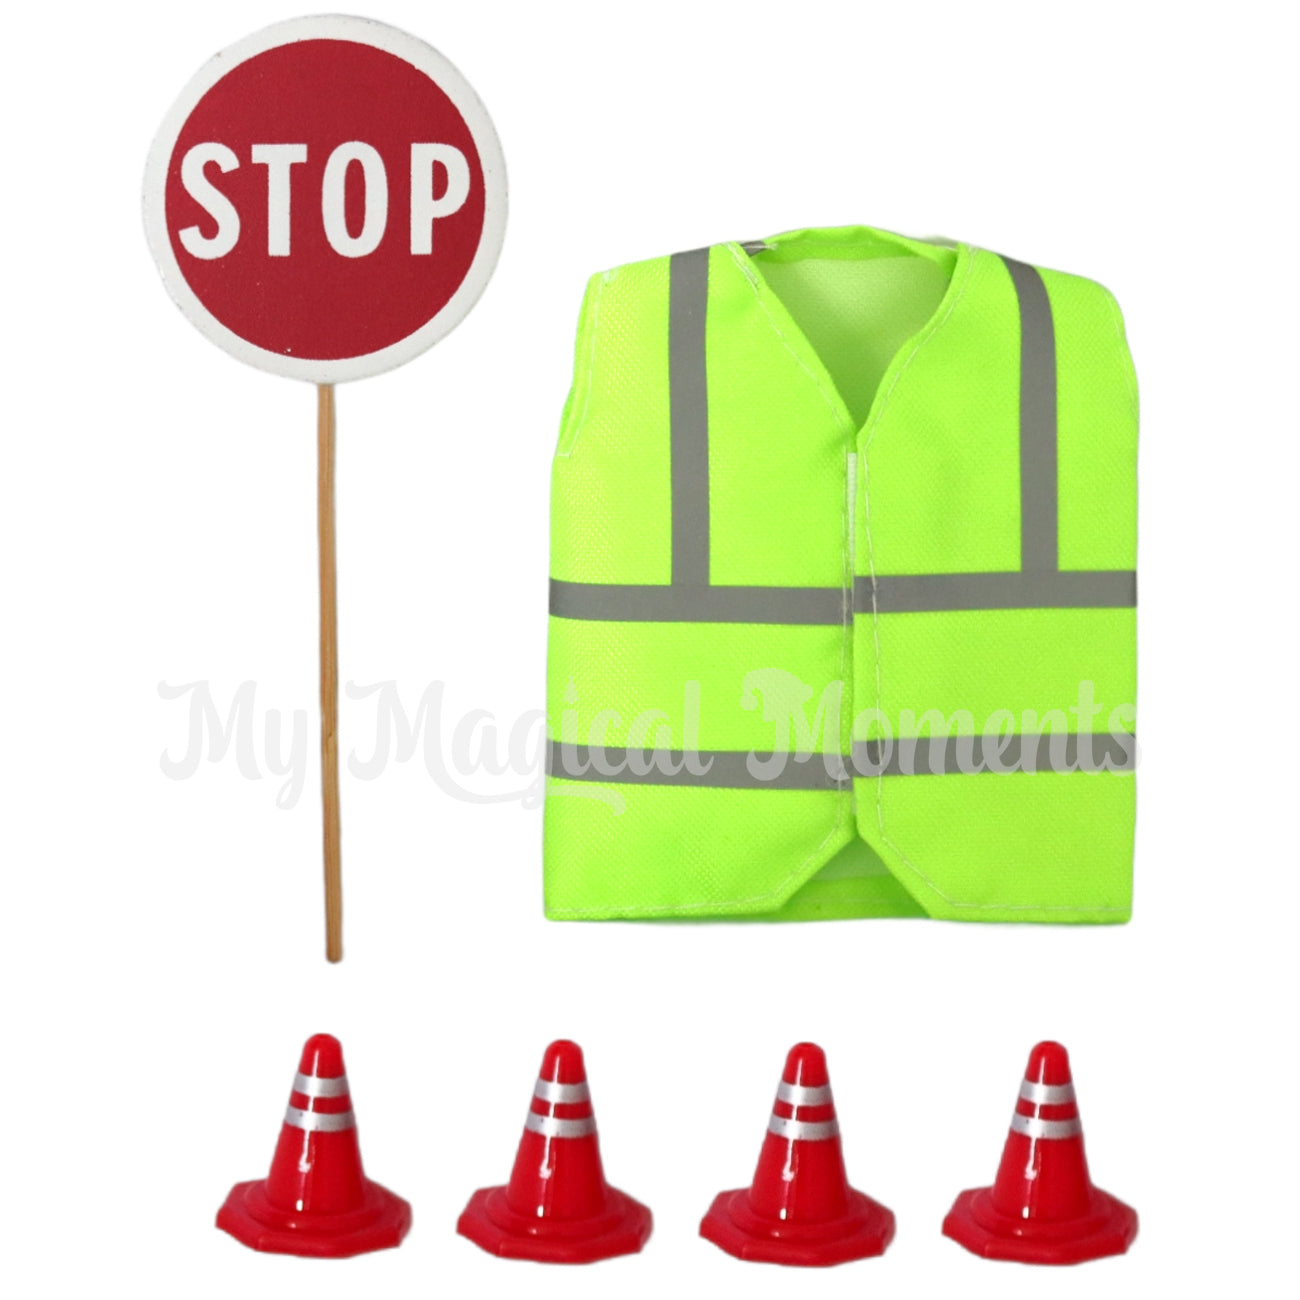 roadworker outfit with sign